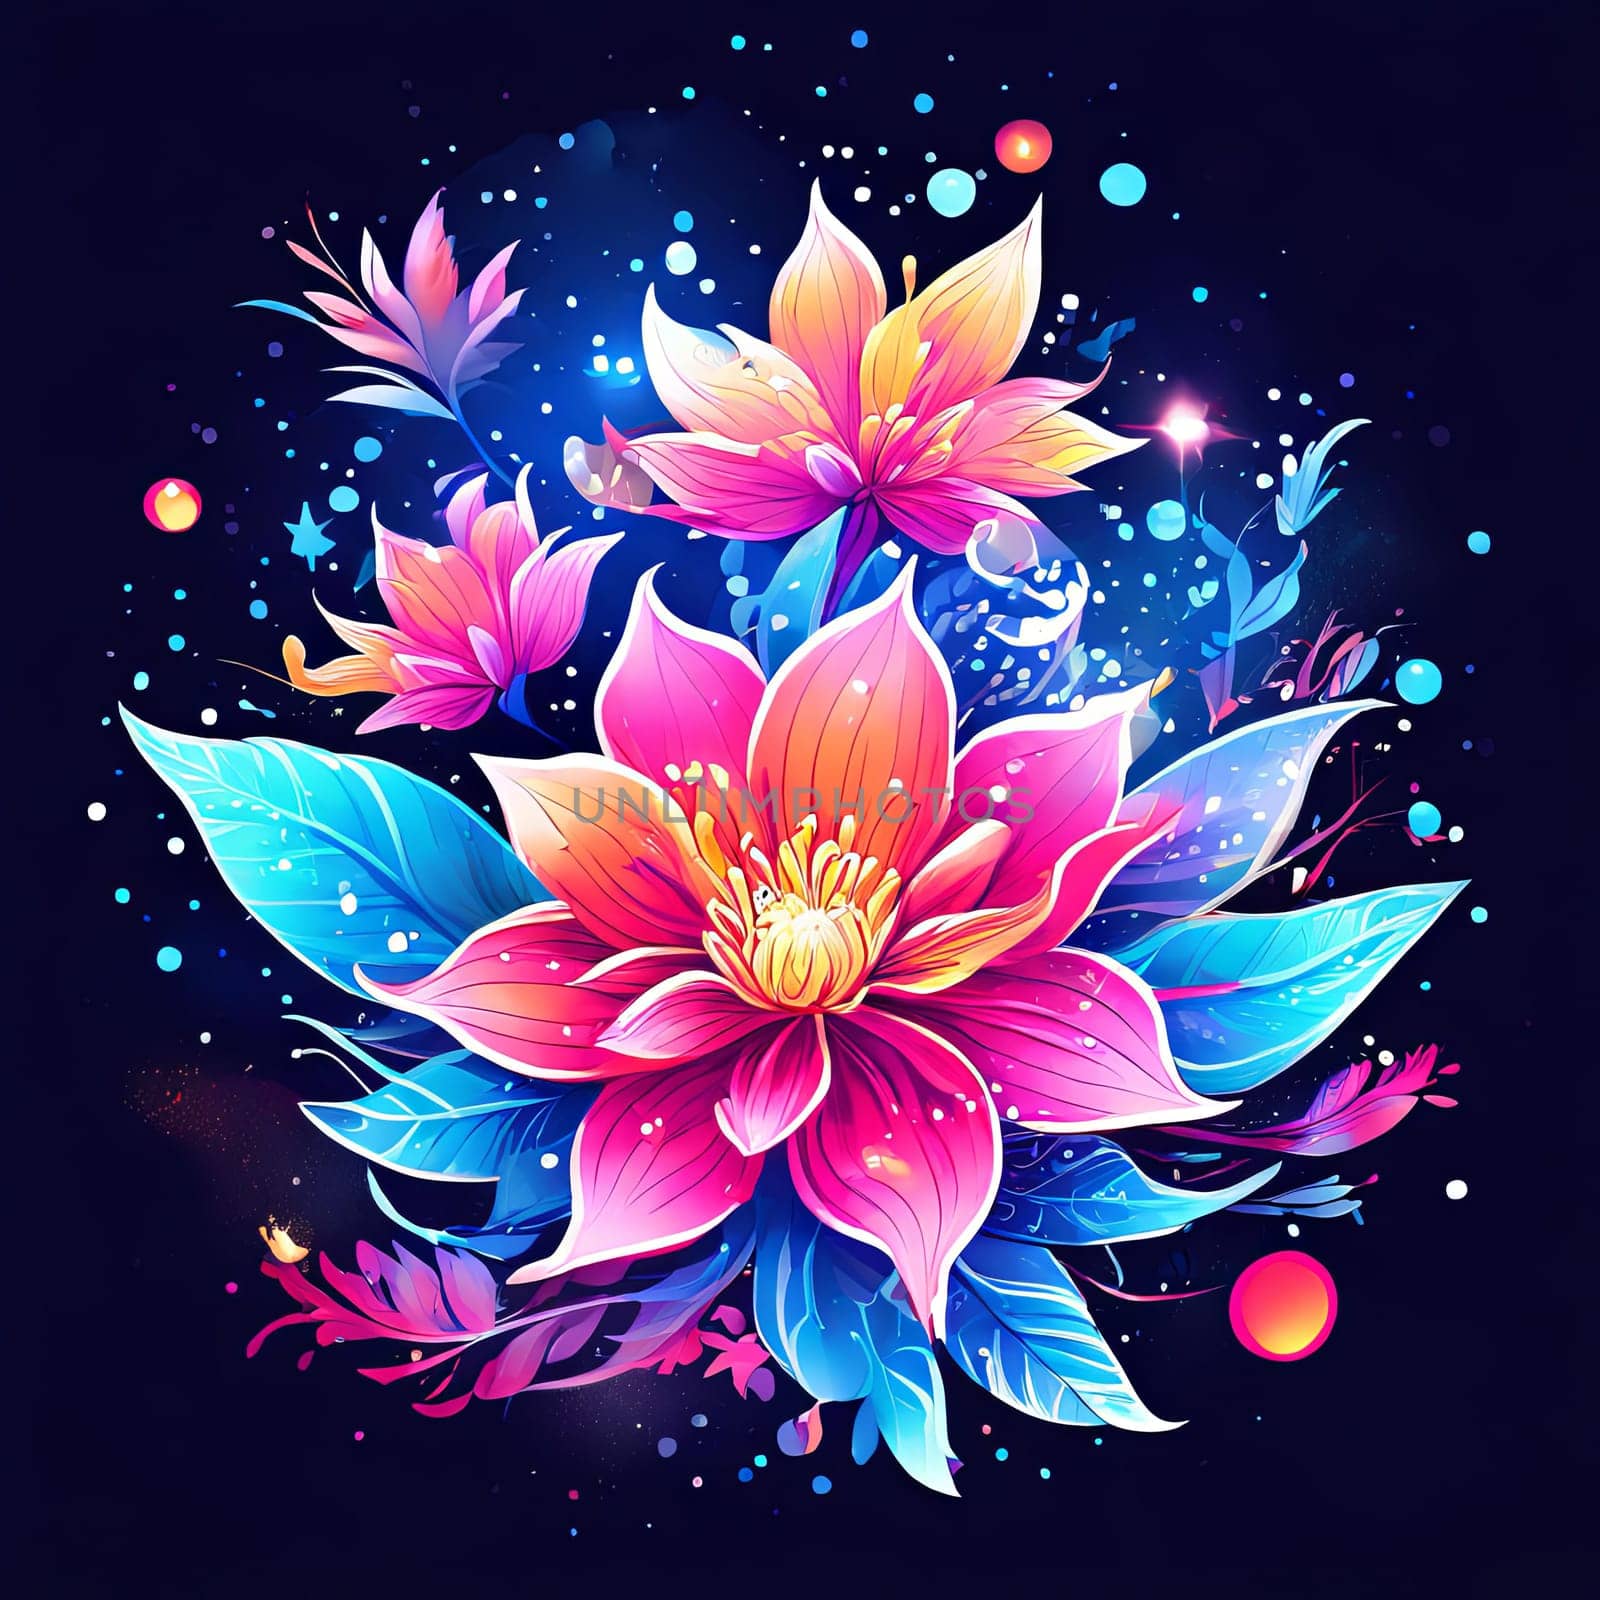 Lotus flowers floating in starry sky. Creating peaceful, enchanting scene that symbolizes purity. For interior design, decoration, art, advertising, web design, as illustration for book, magazine. by Angelsmoon